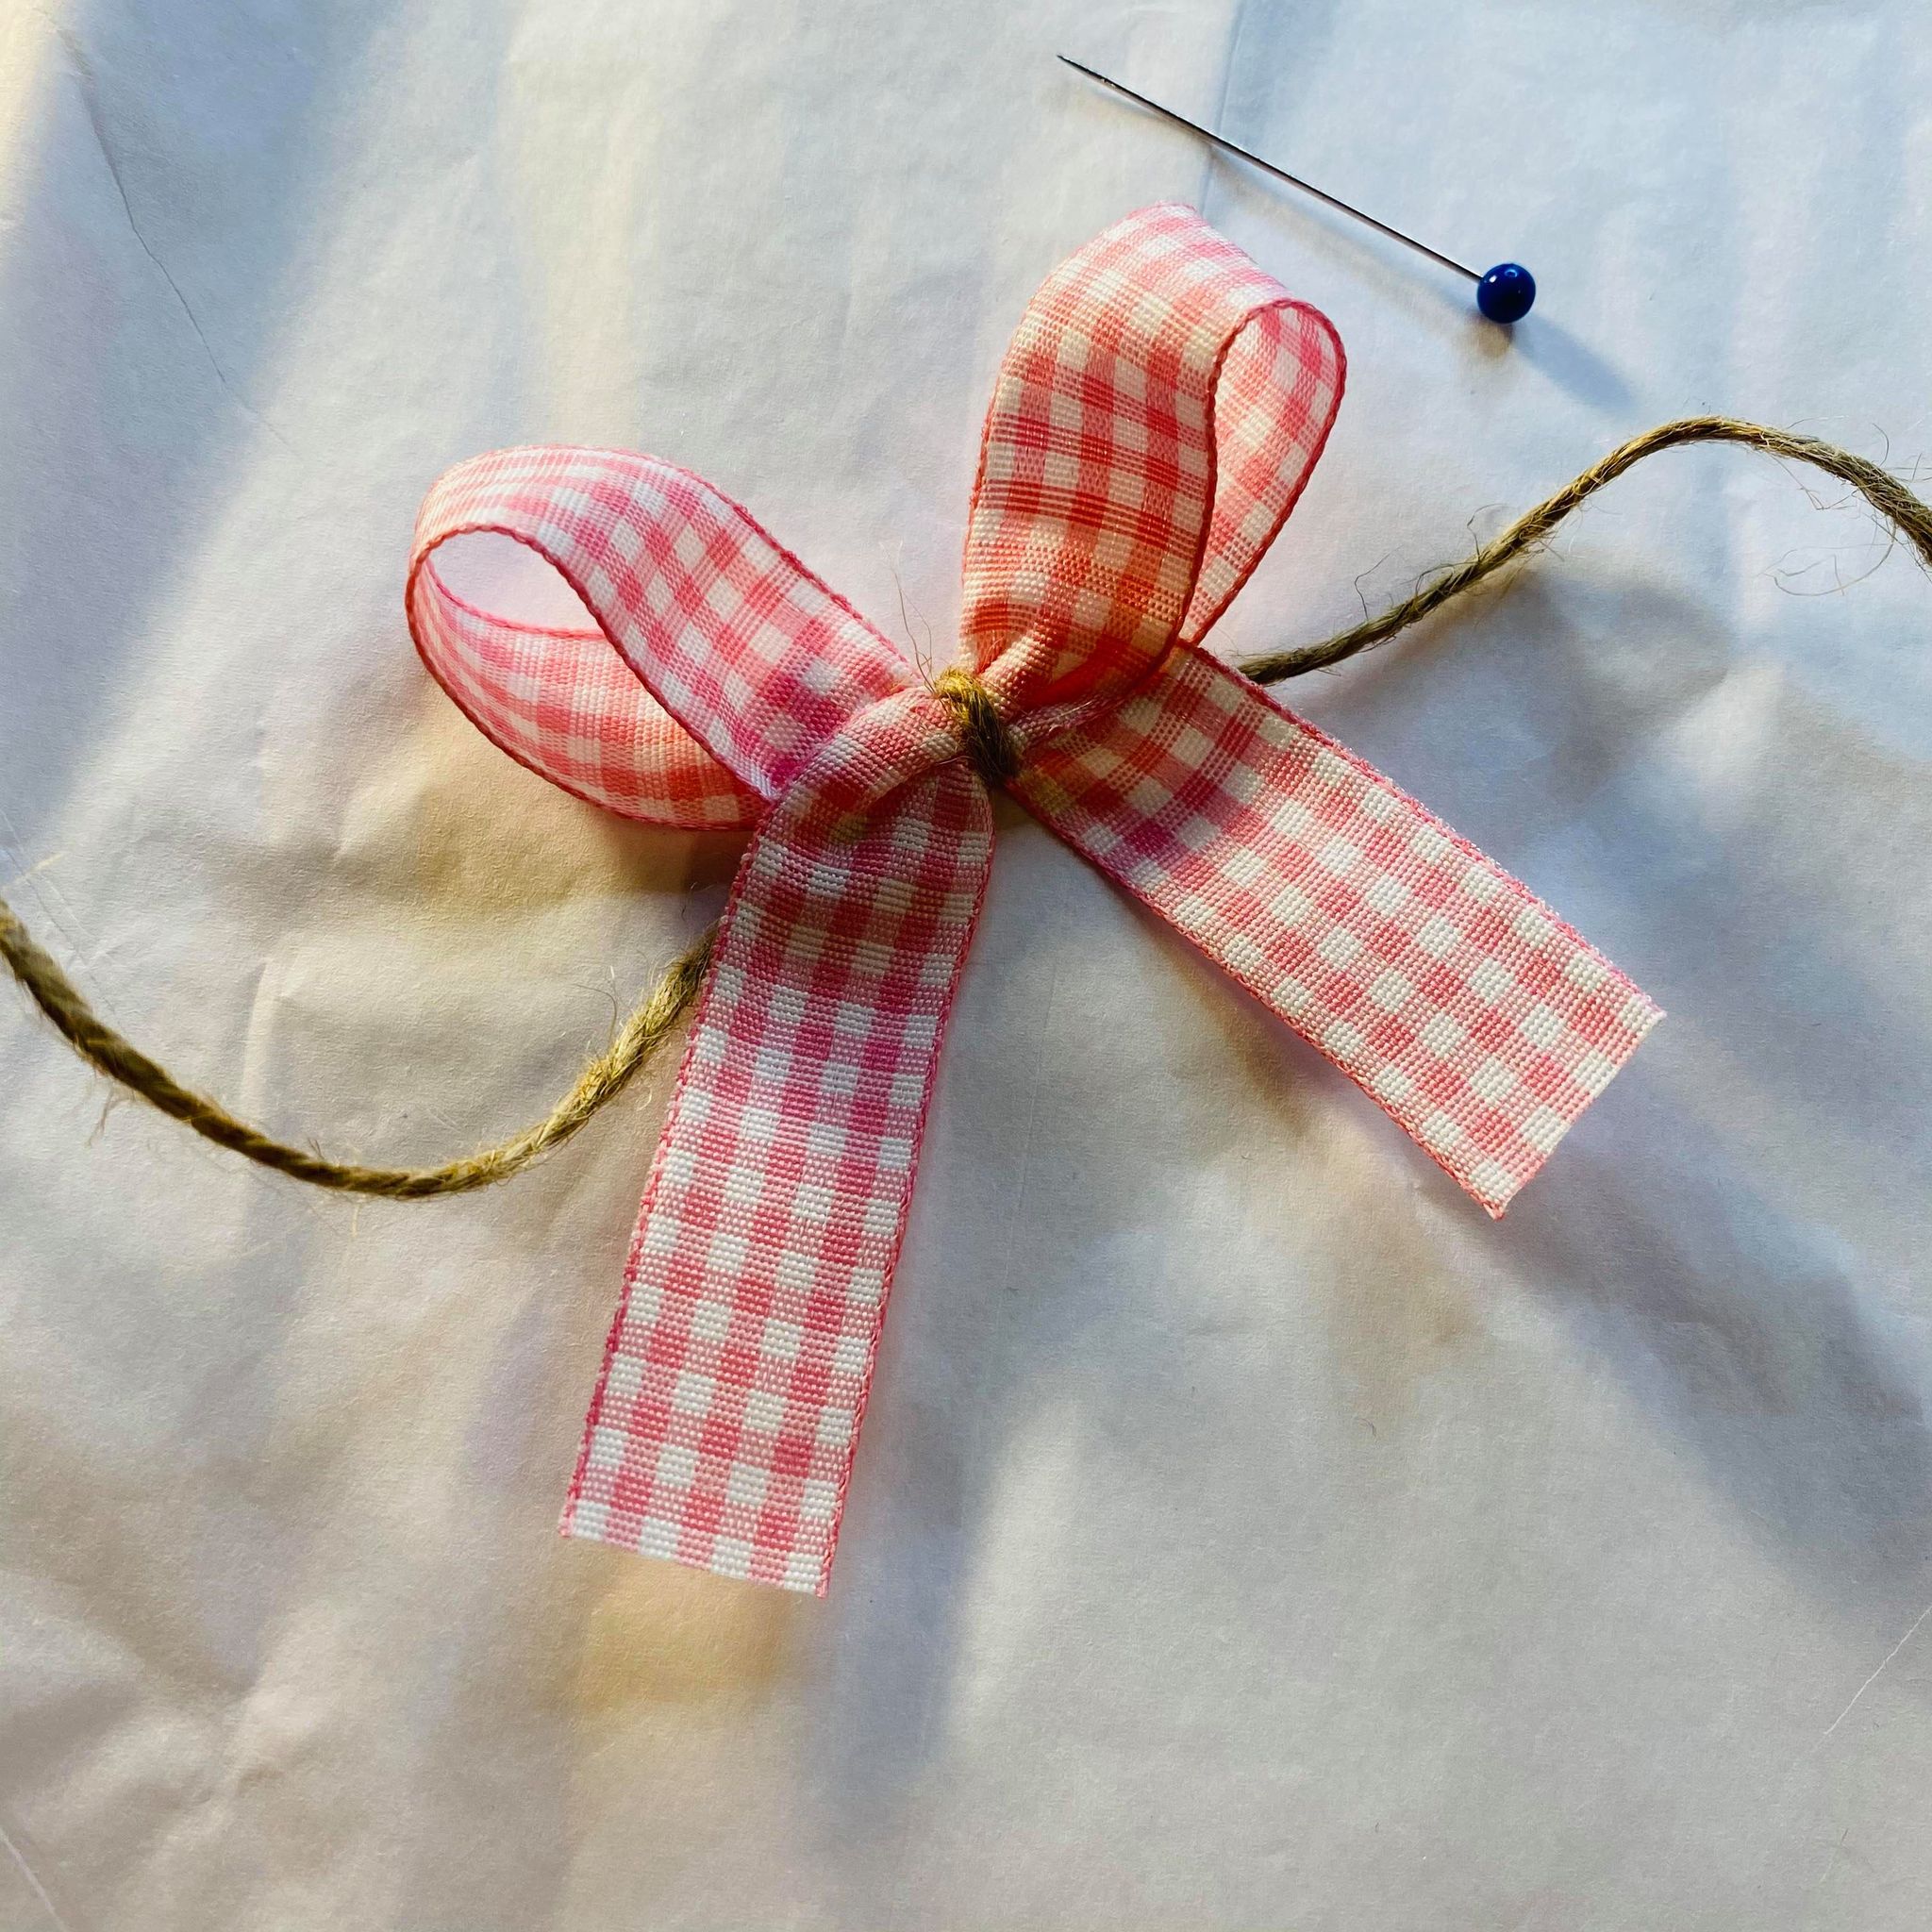 A Simple Way to Make a Bow - Awareness Ribbon Method - My Eclectic Treasures